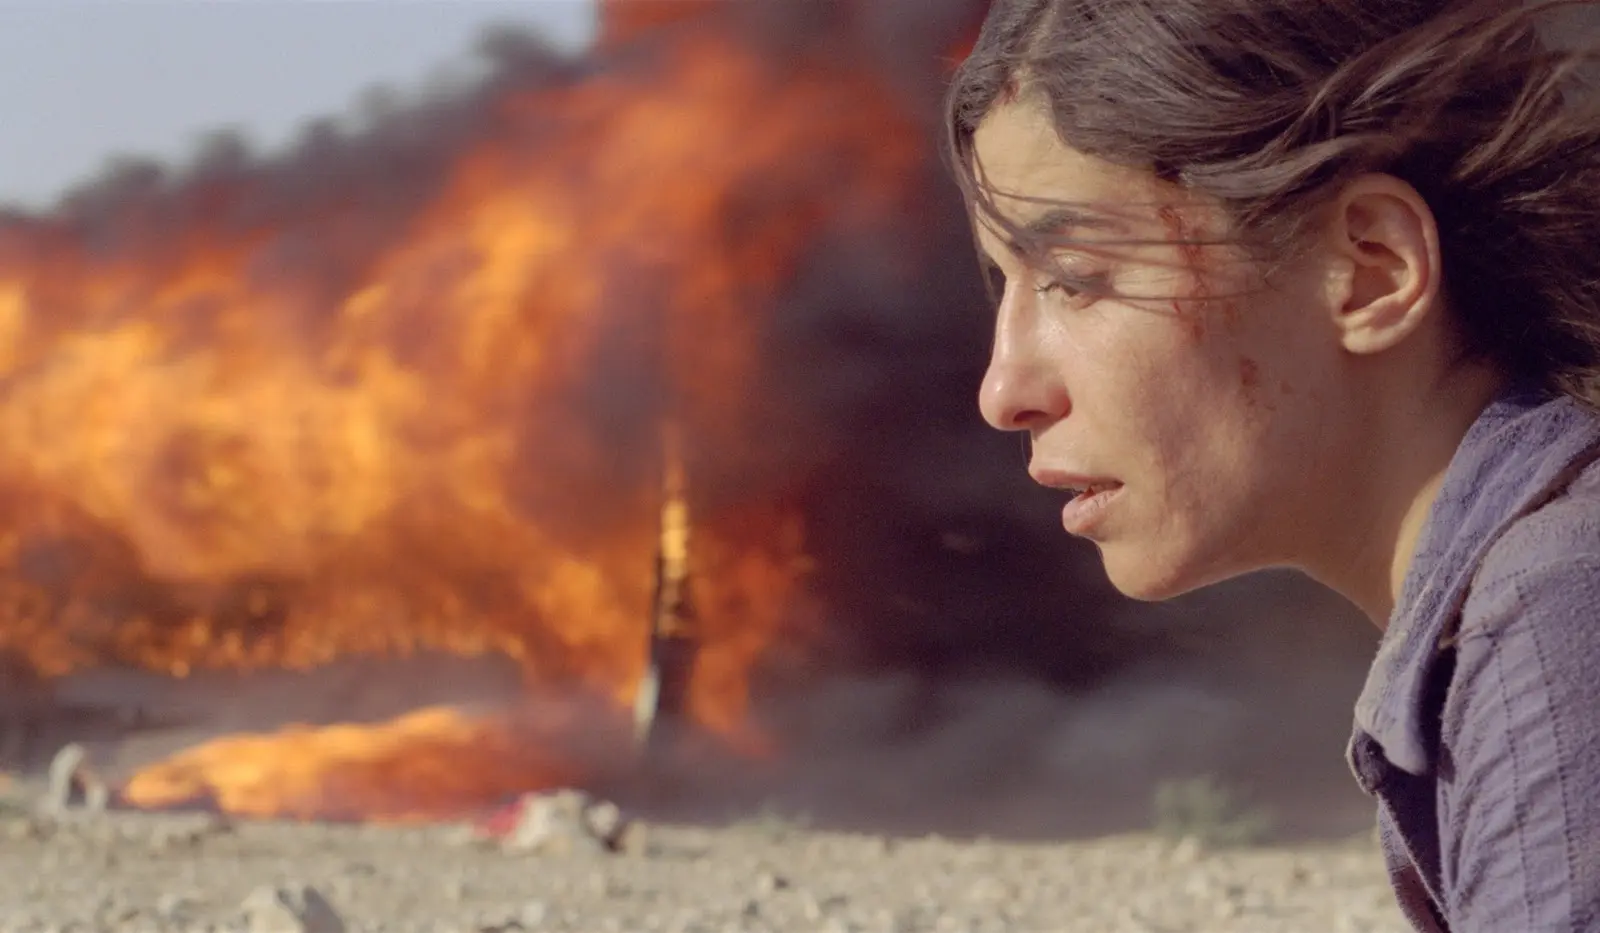 7 Reasons Why “Incendies” Is Denis Villeneuve's Overlooked Masterpiece |  Taste Of Cinema - Movie Reviews and Classic Movie Lists